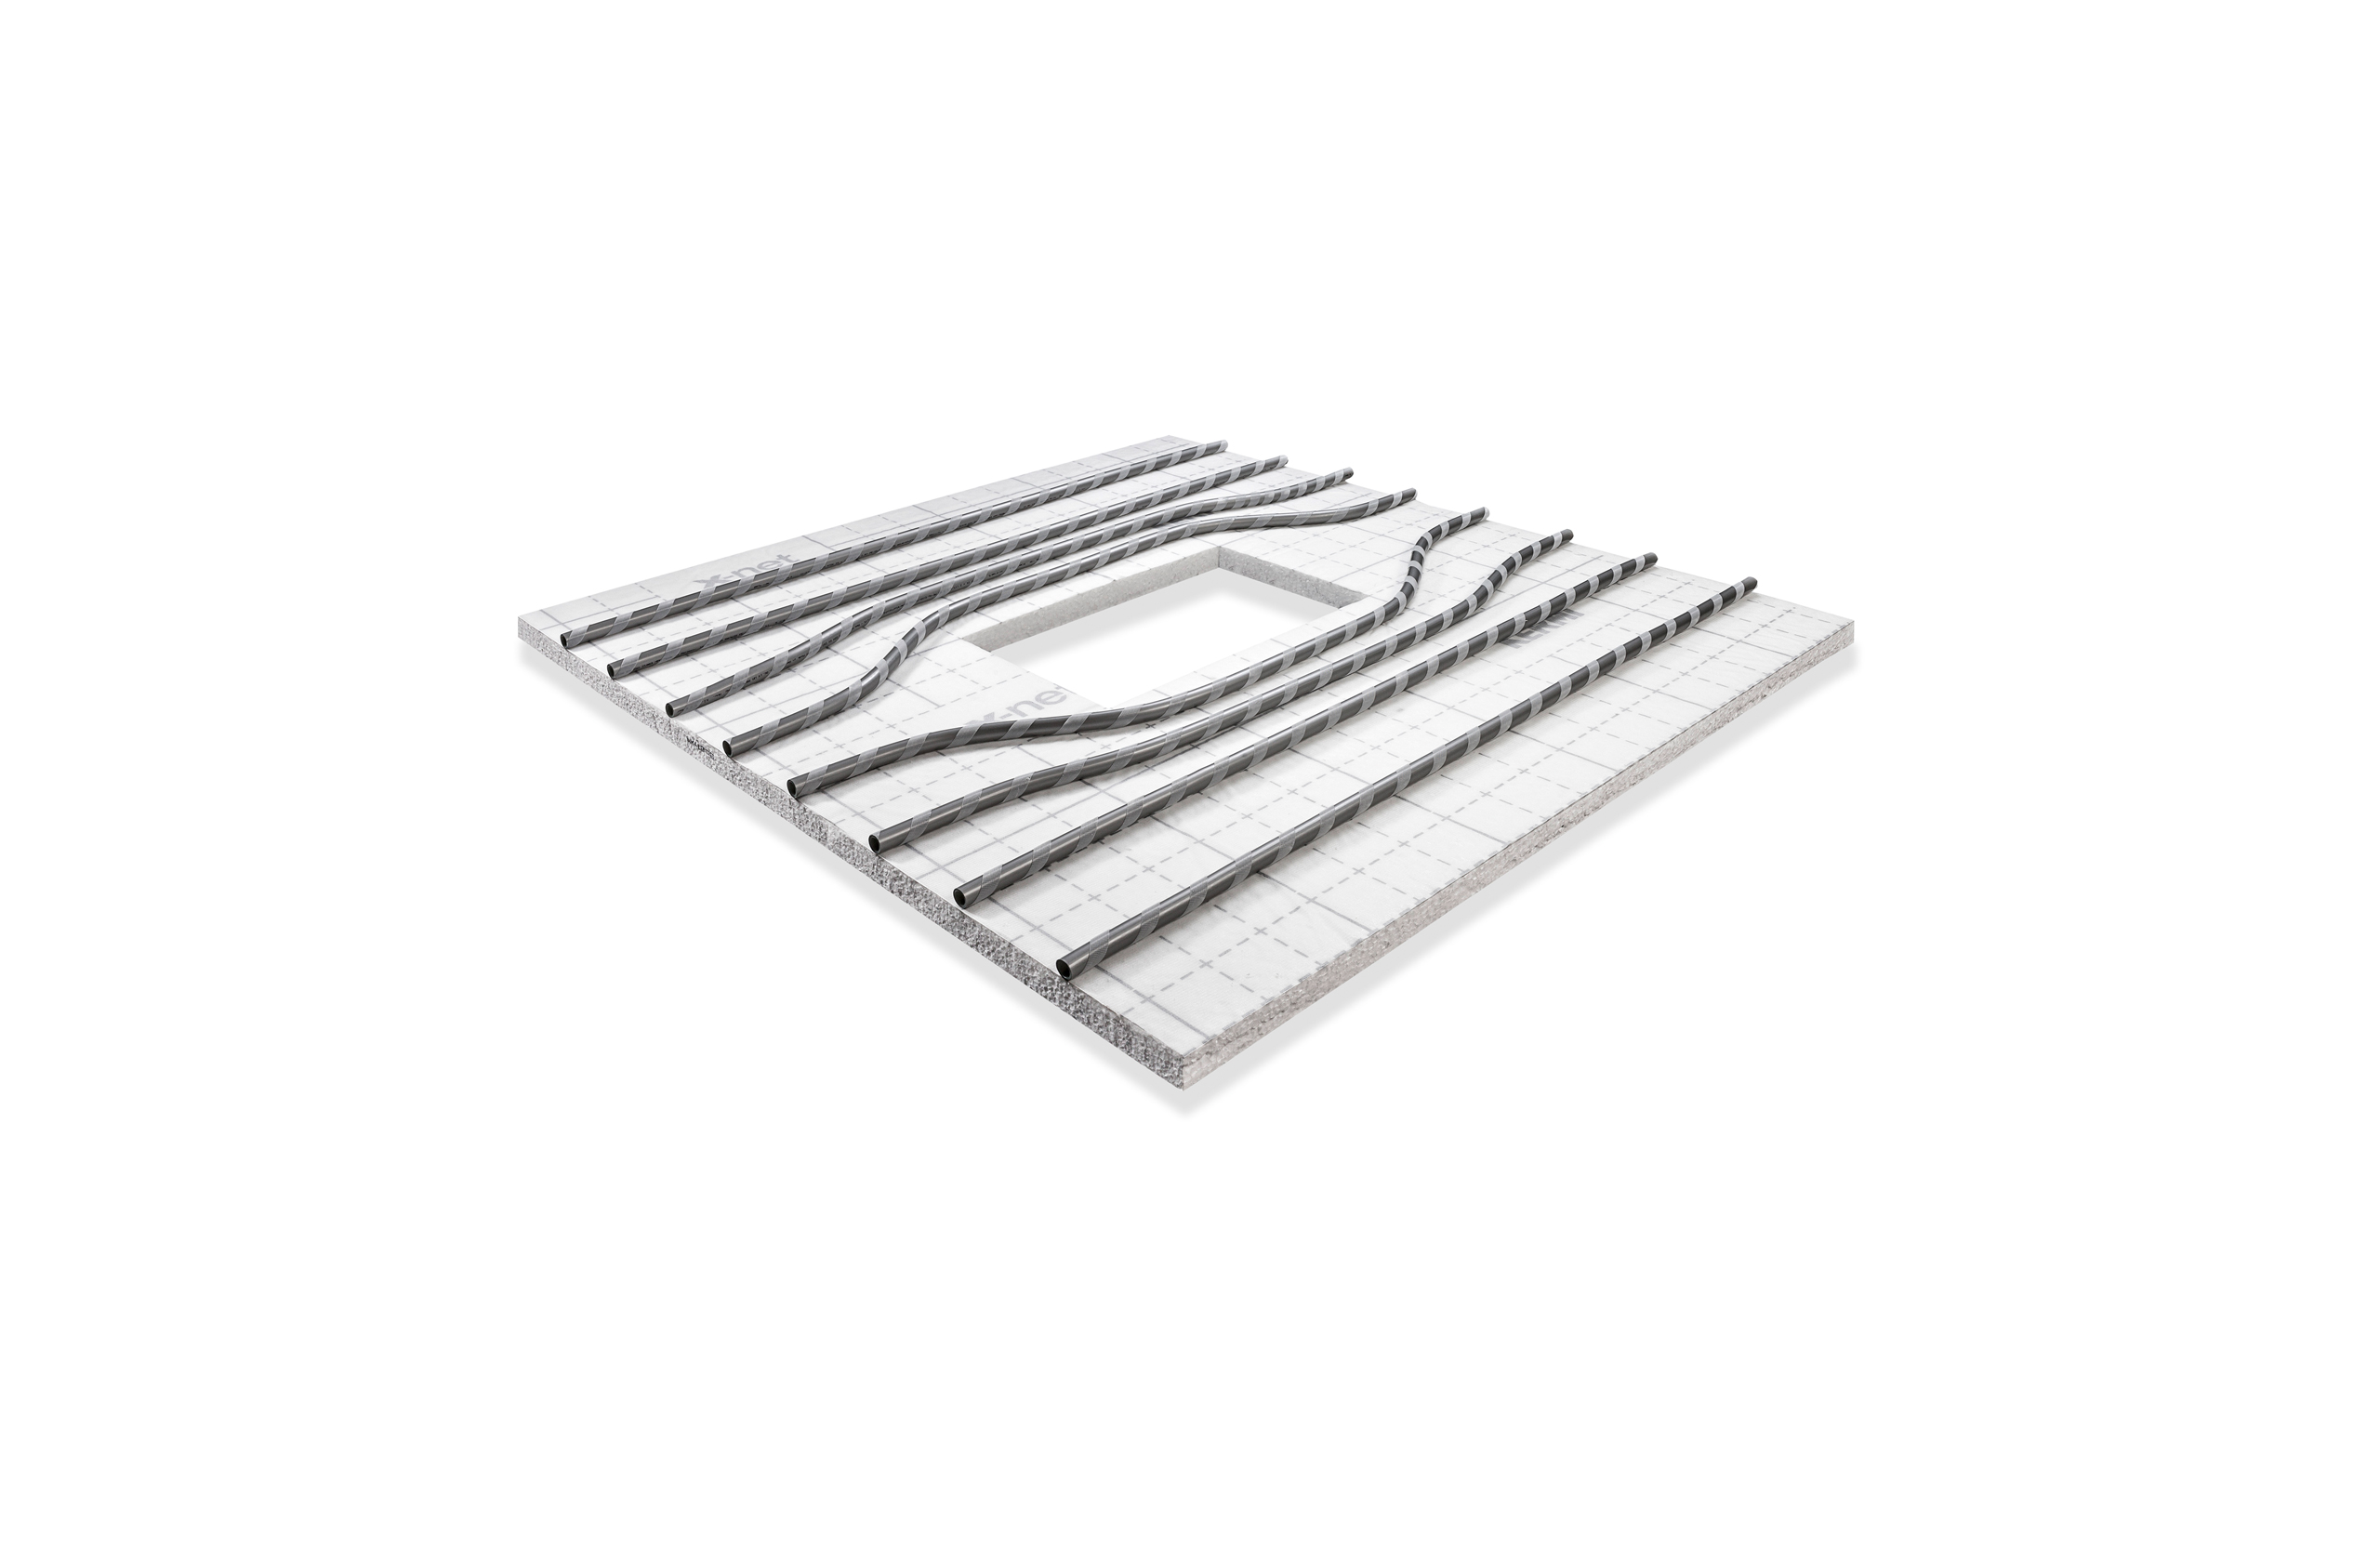 x-net C17 hook-and-loop system underfloor heating – the tool-free installation system.